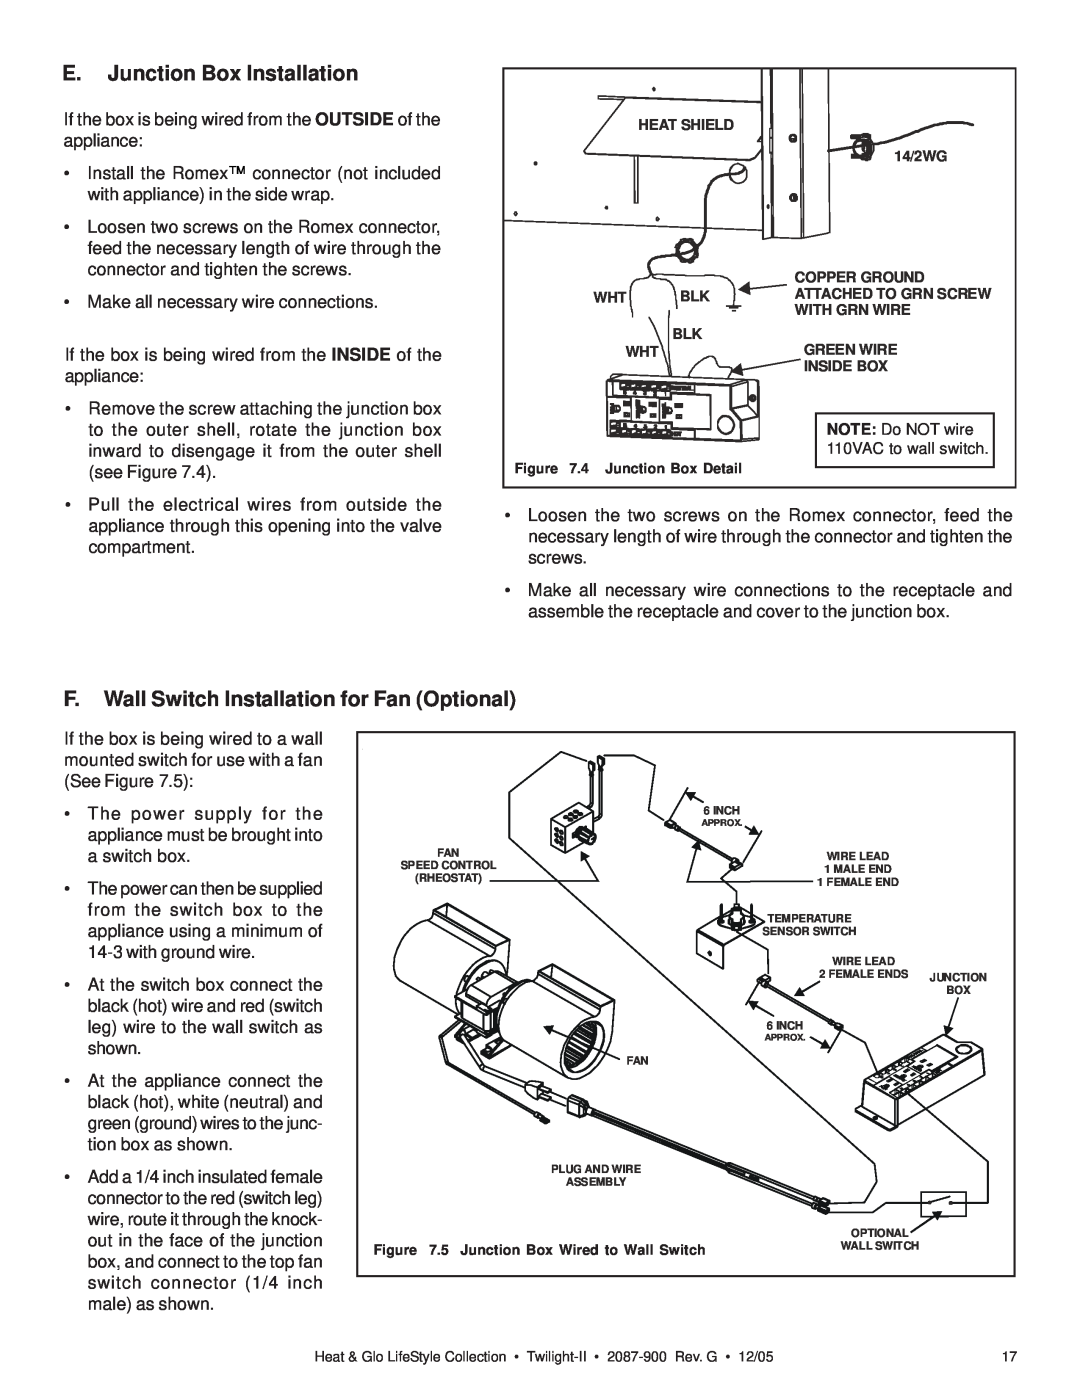 Heat & Glo LifeStyle TWILIGHT-II owner manual E.Junction Box Installation, F.Wall Switch Installation for Fan Optional 